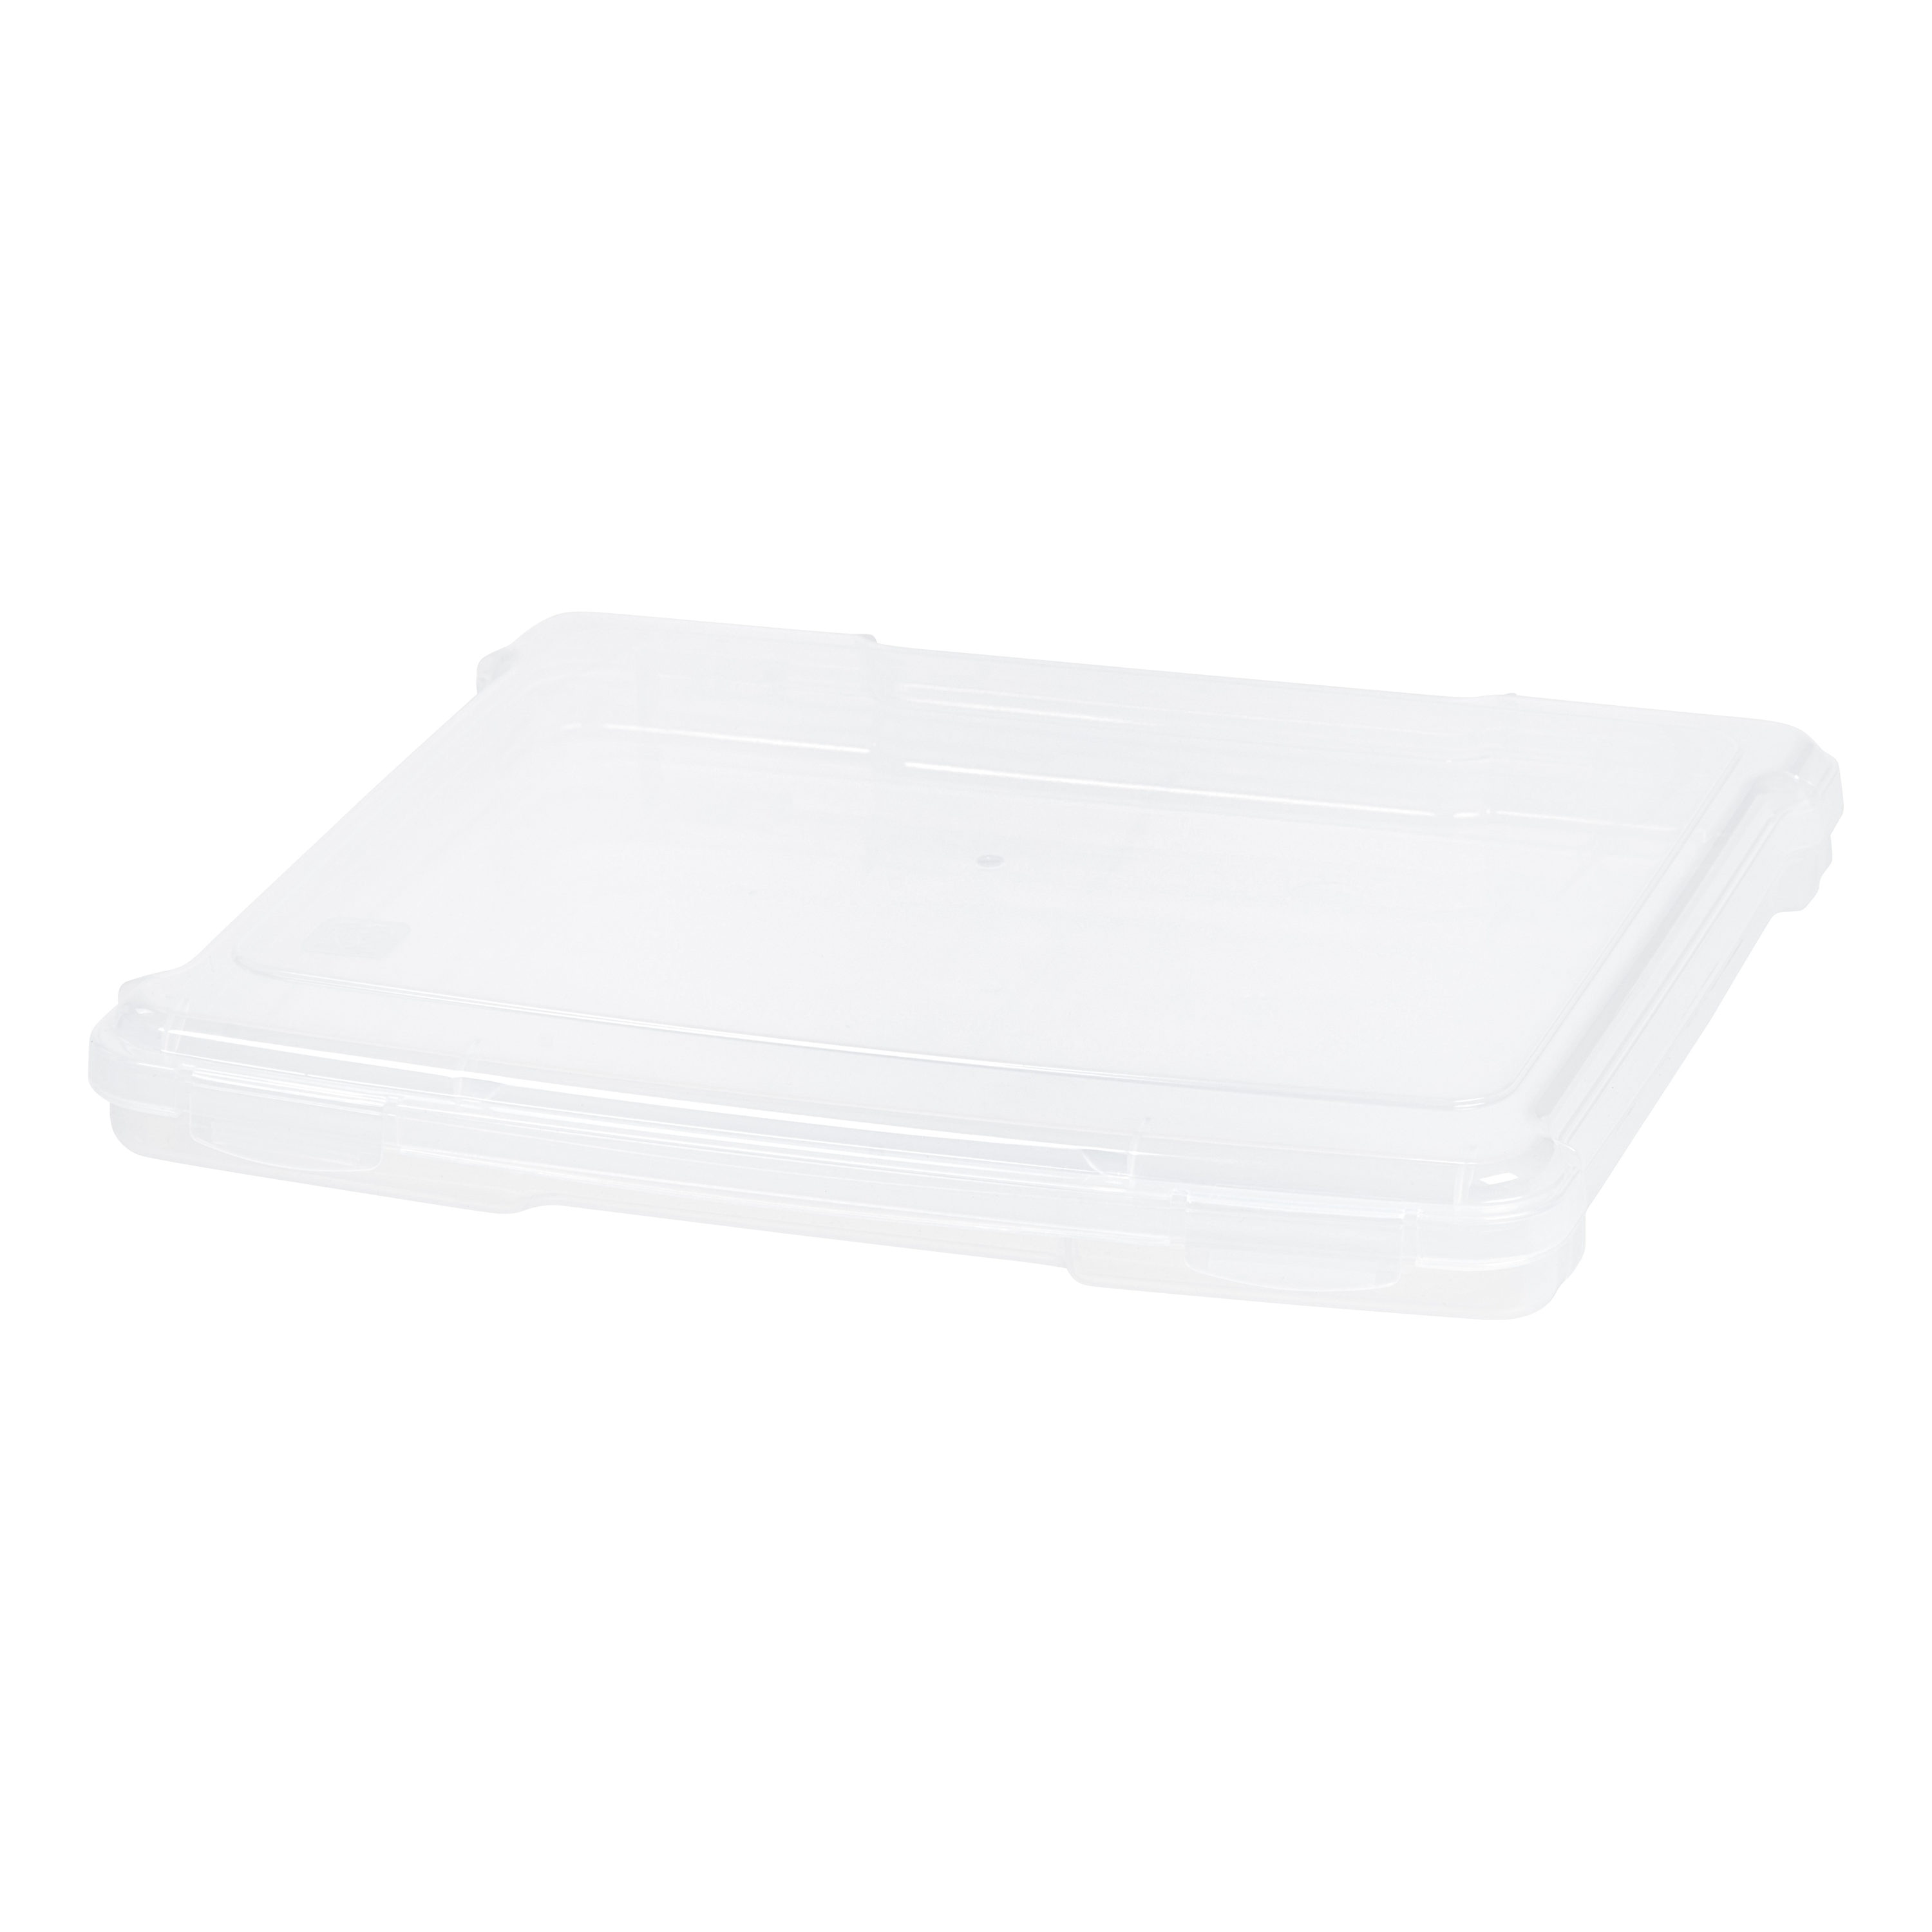 IRIS Portable Scrapbook Case for 12 x 12 Paper, 6 Pack, Clear